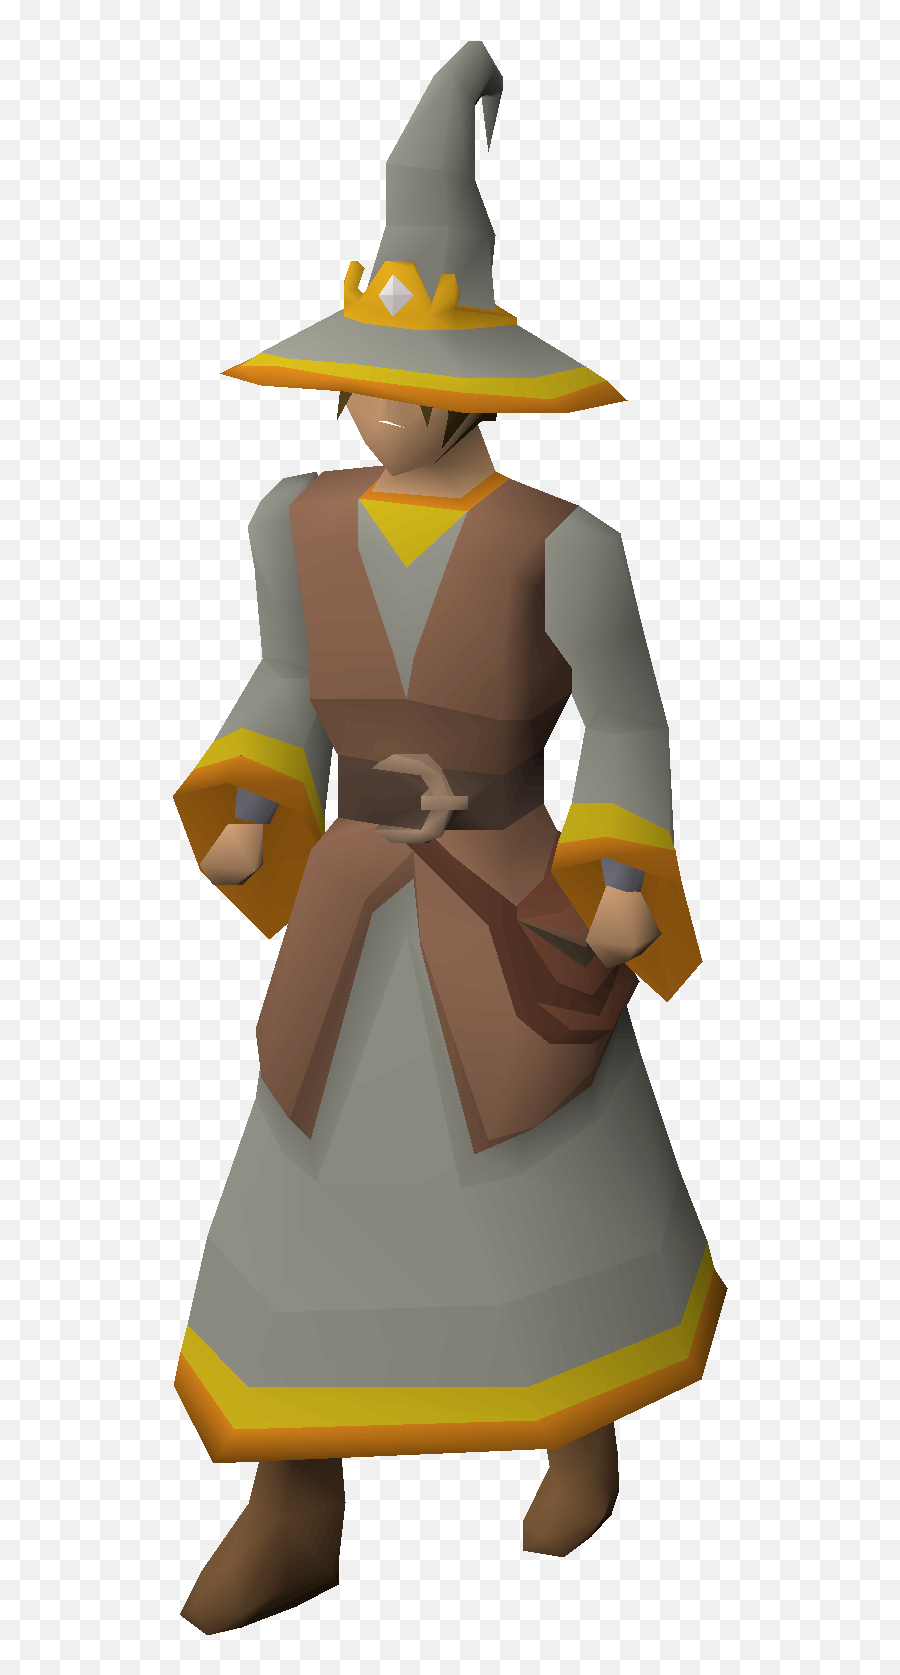 Raiments Of The Eye - Osrs Wiki Raiments Of The Eye Recolor Osrs Png,Icon Colossal Helmet